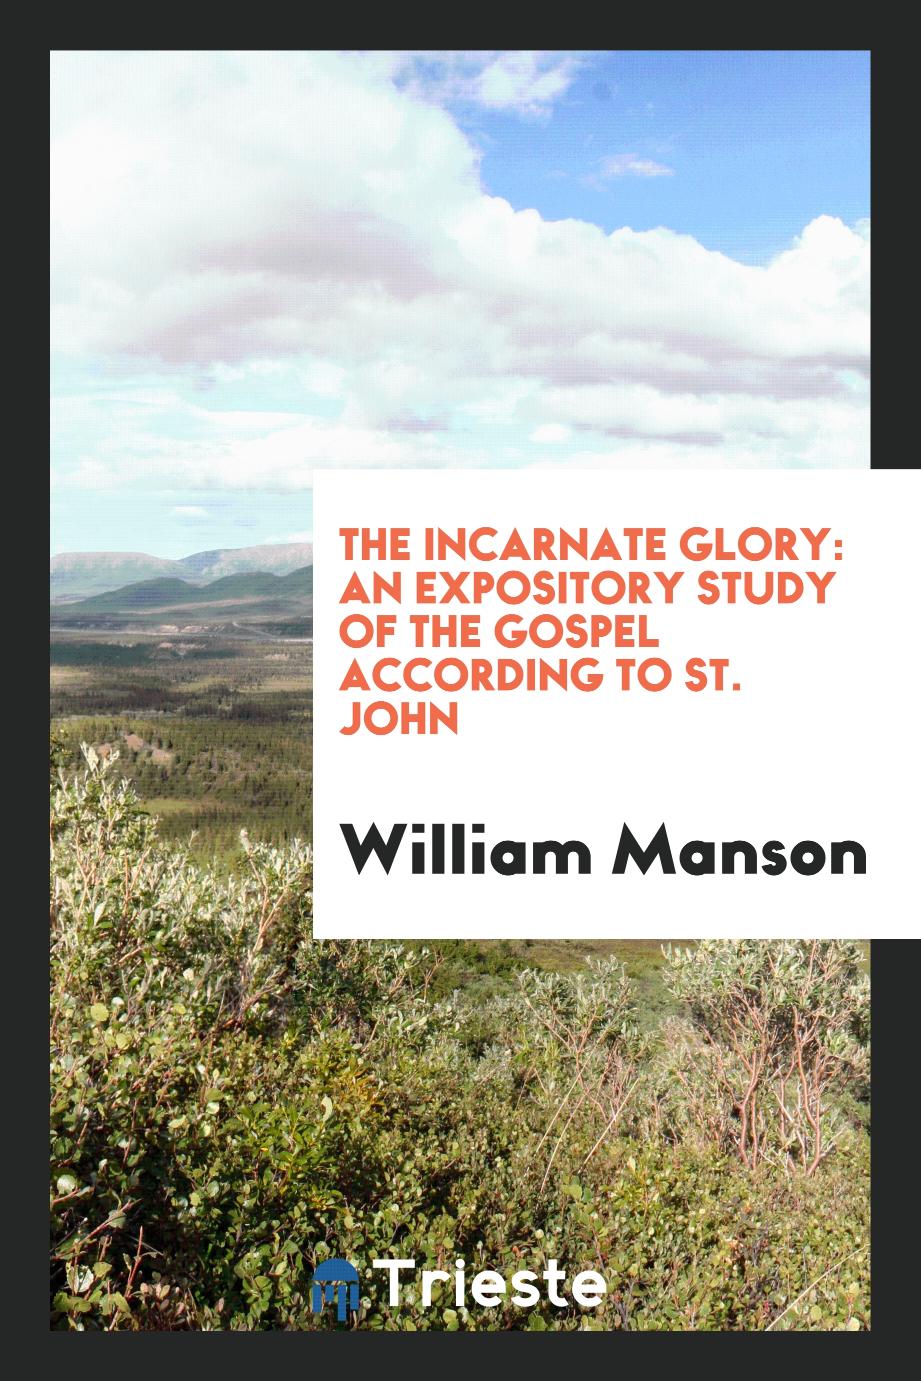 The incarnate glory: an expository study of the gospel according to St. John